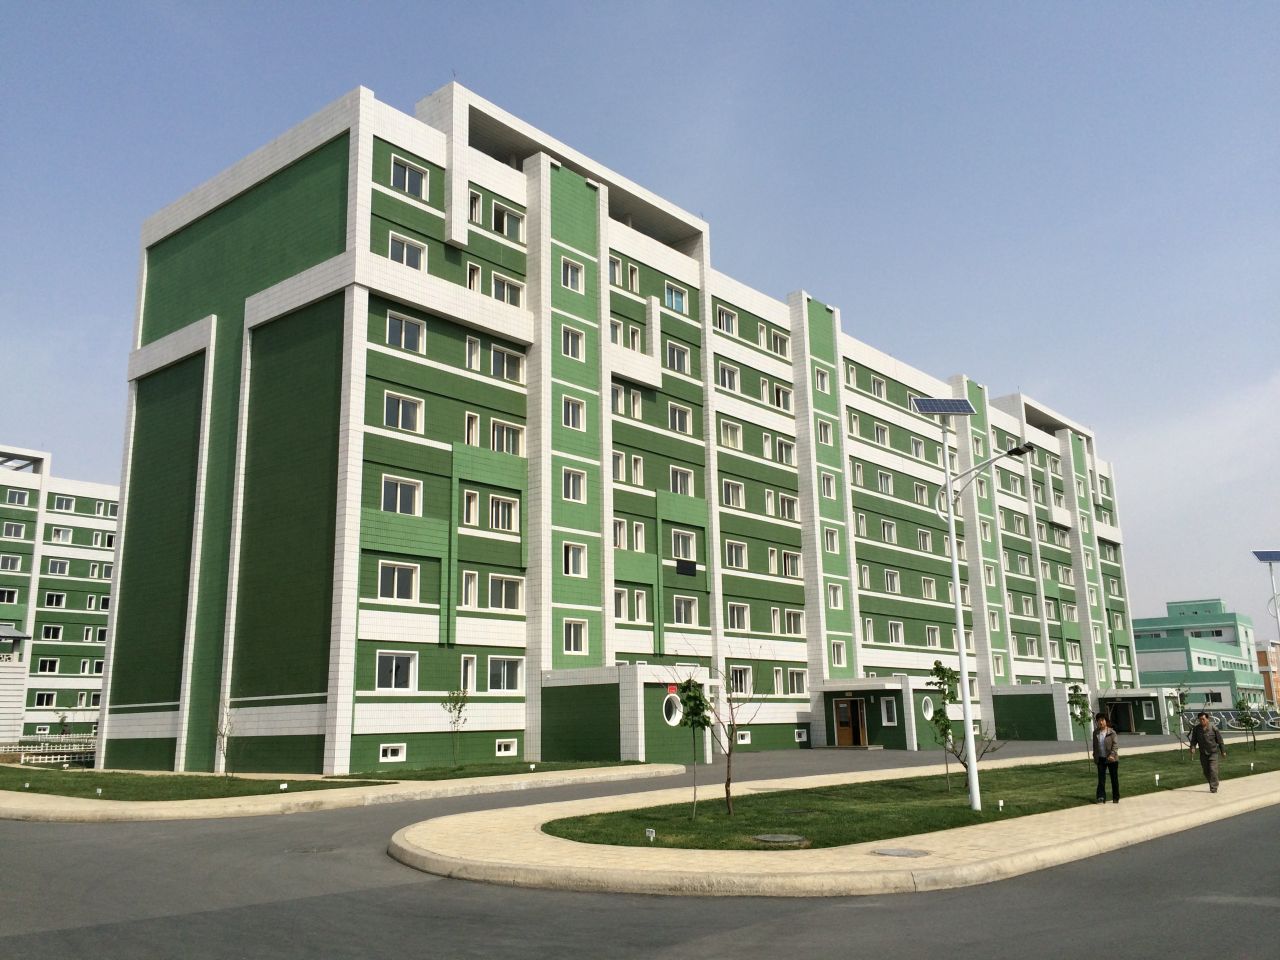 This Pyongyang housing complex was built exclusively for scientists and their families.